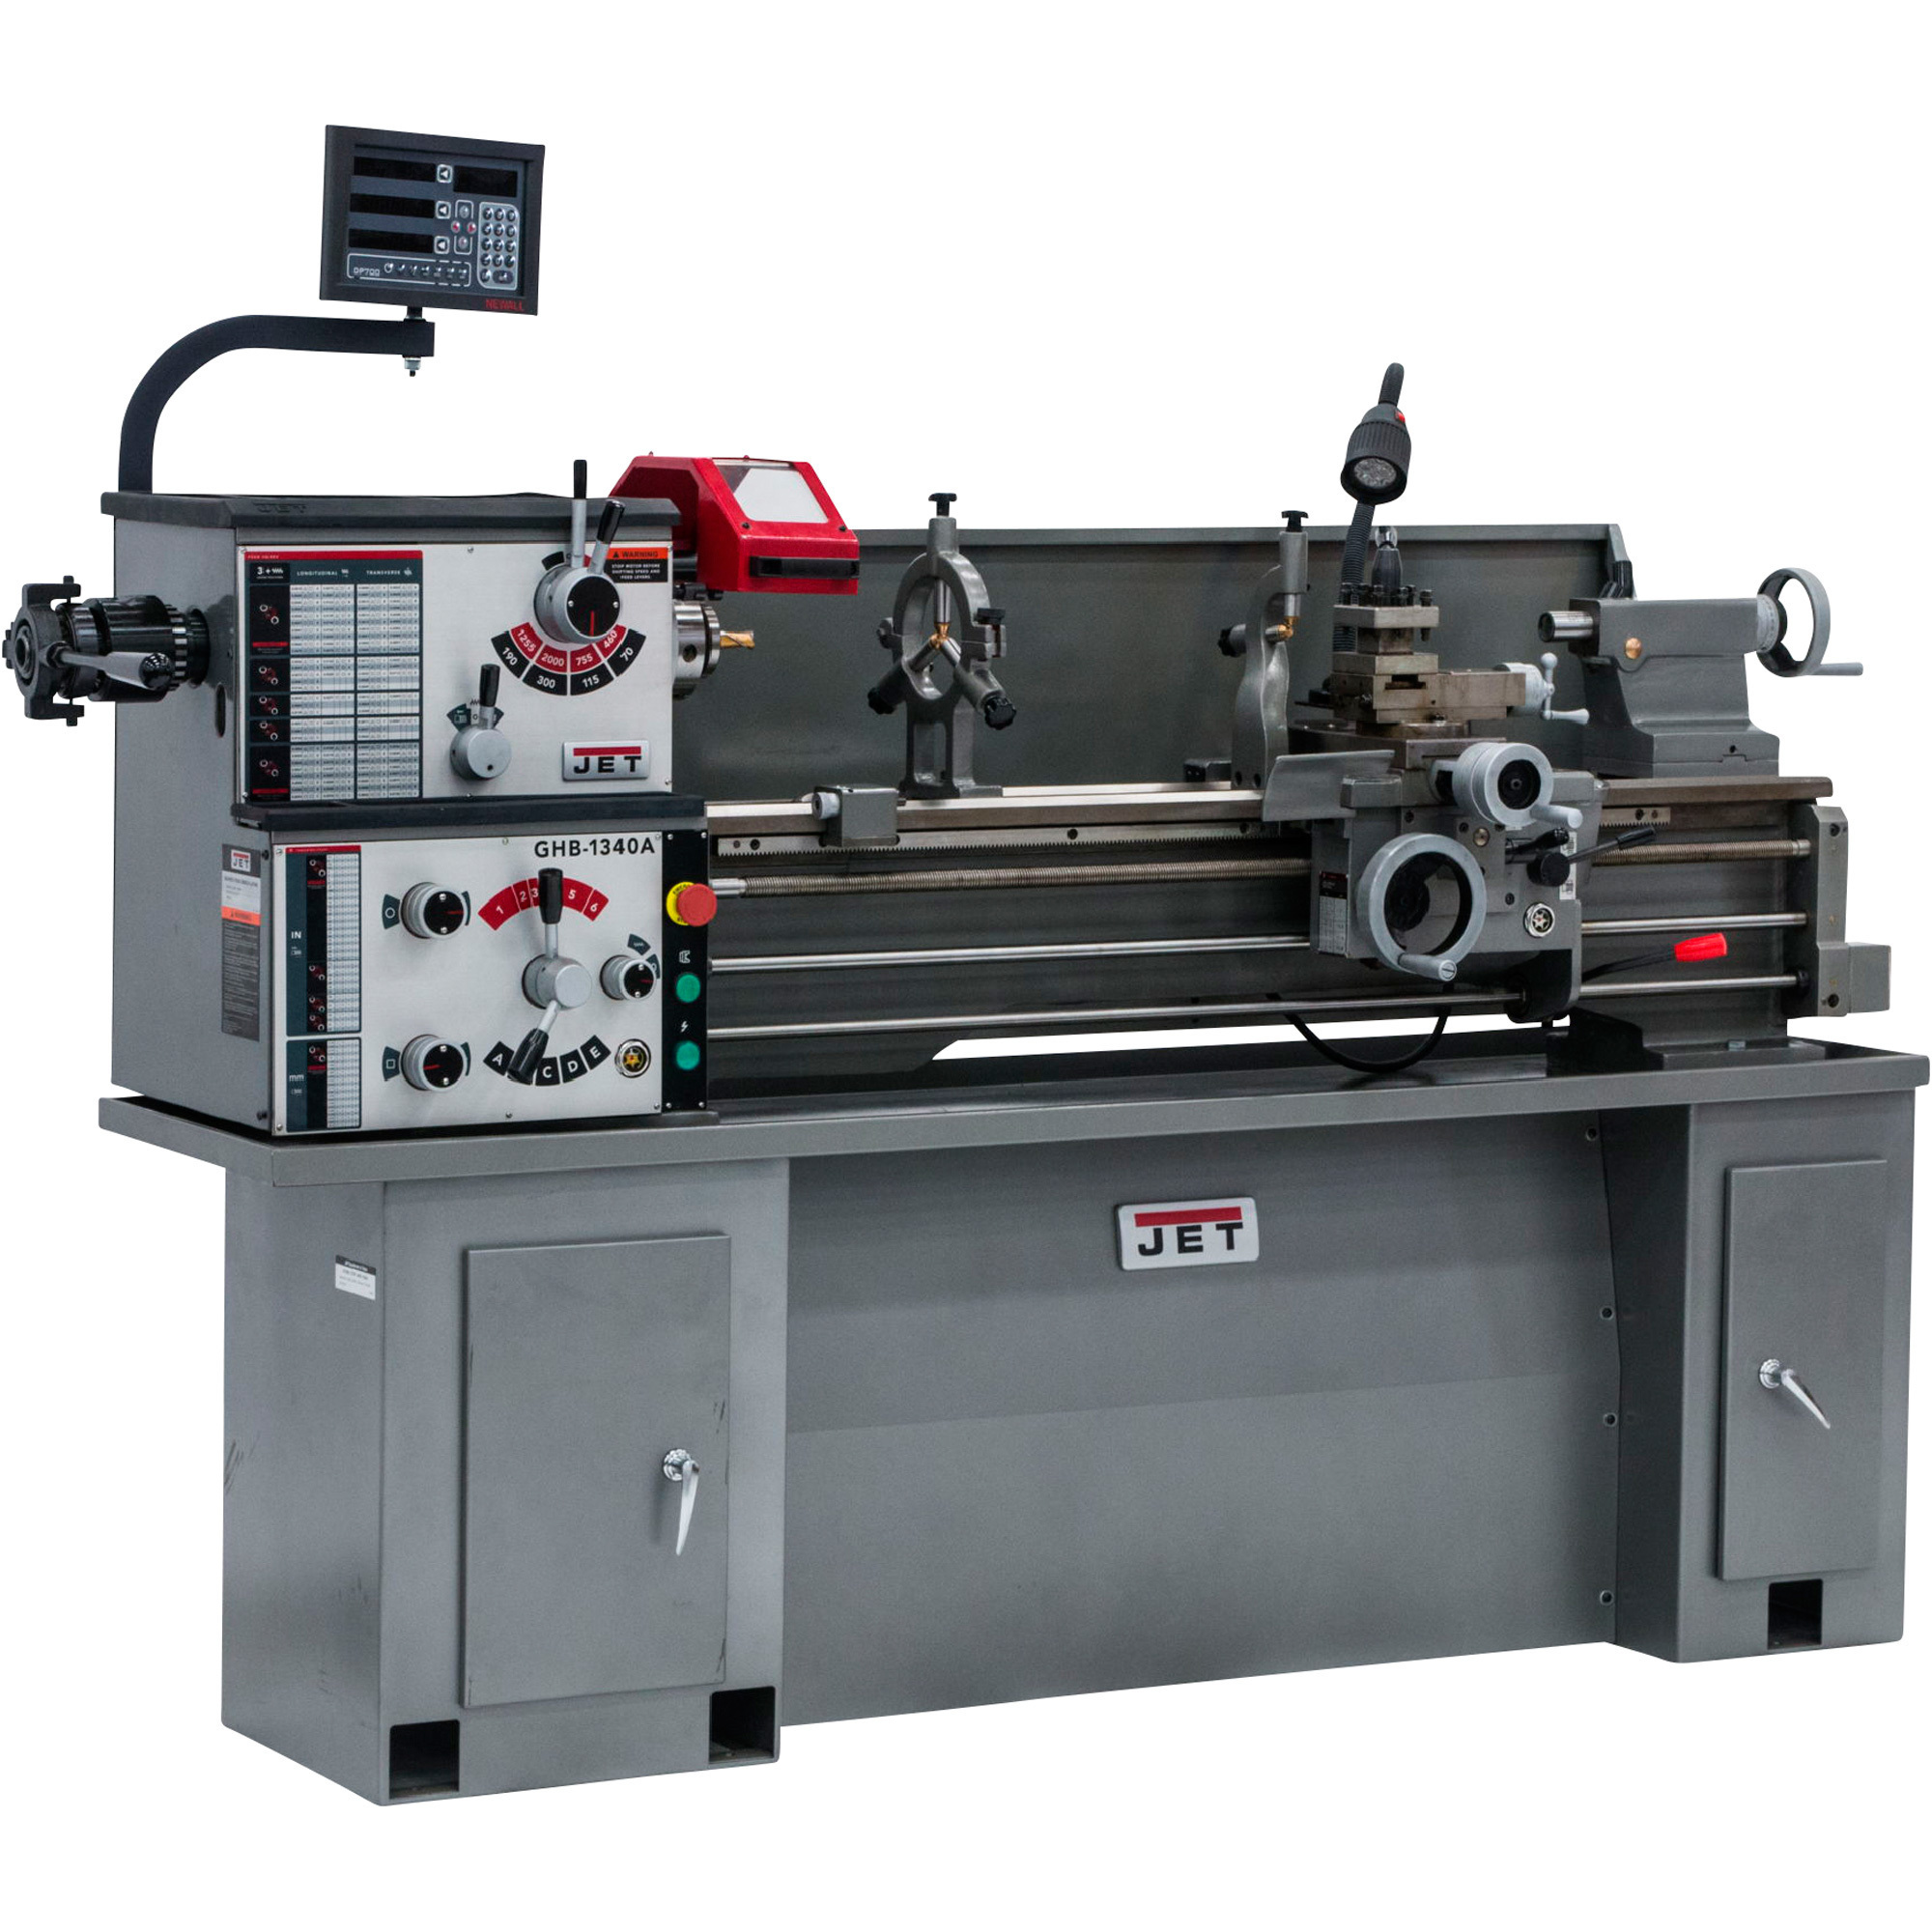 Geared Head Bench Lathe with Acu-Rite 203 DRO — 13Inch x 40Inch, Model GHB-1340A/ - JET 321122